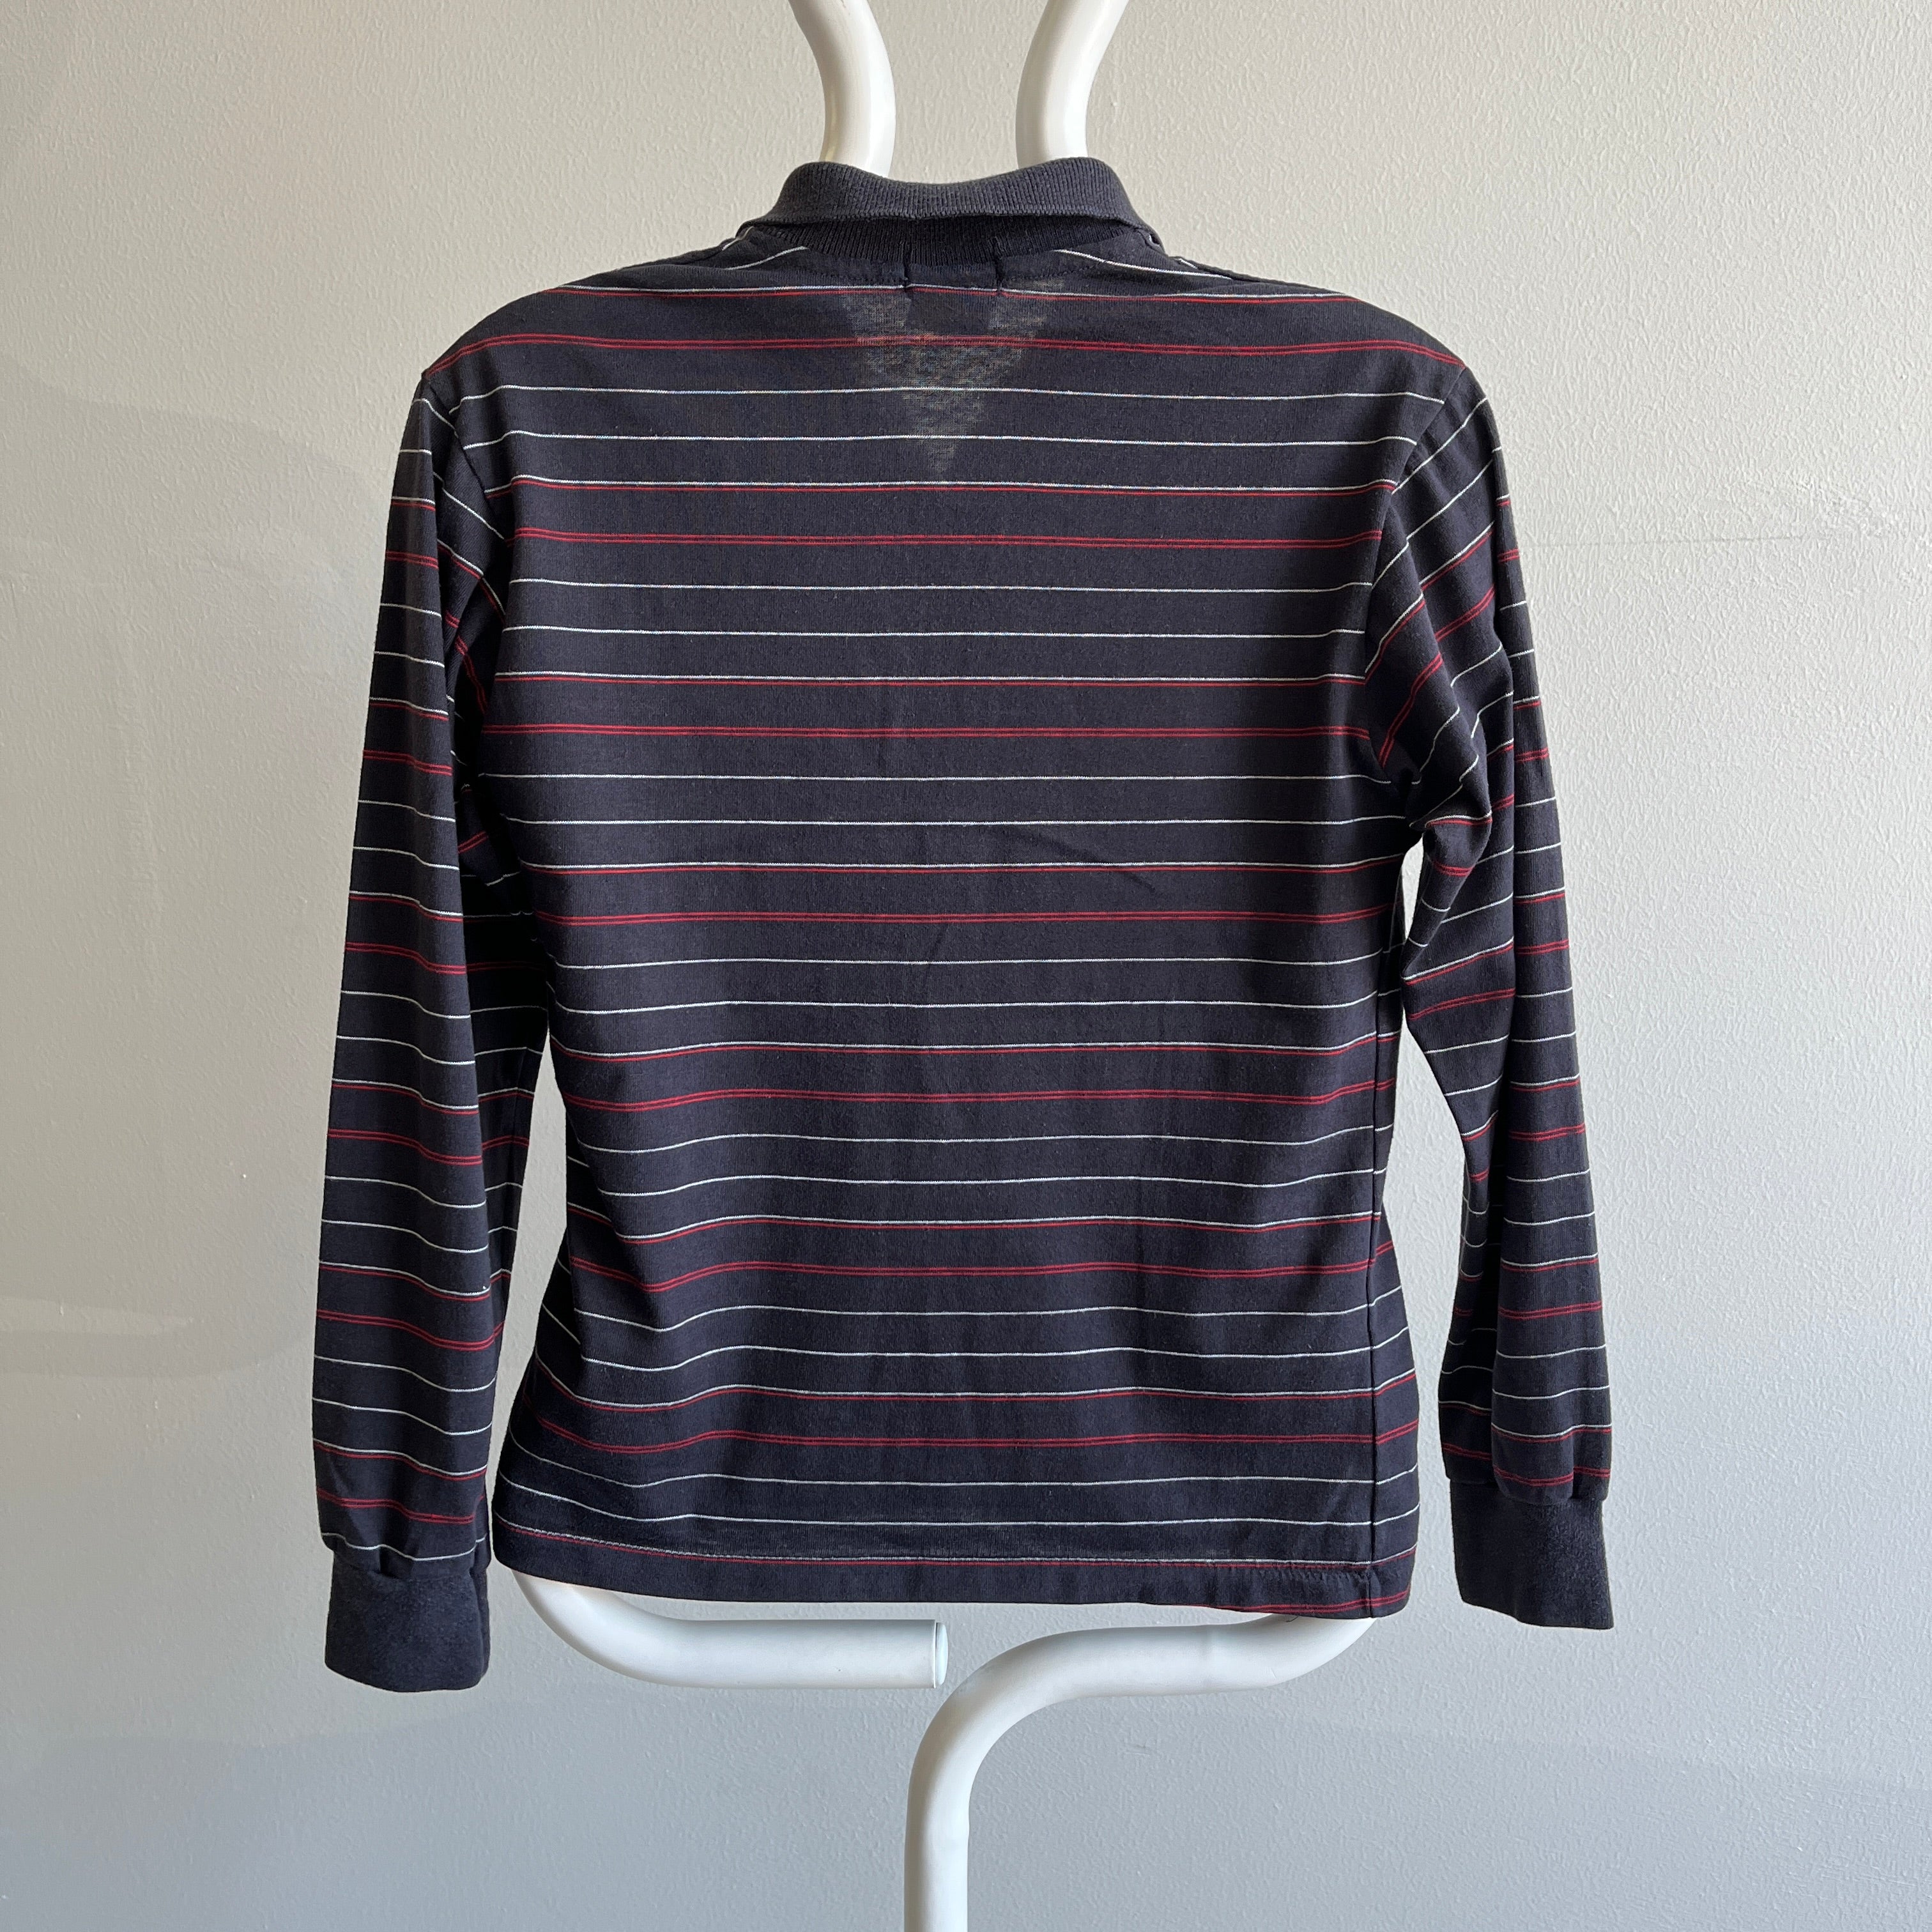 GG - 1980s IZOD Lacoste Long Sleeve Striped Polo Shirt - Smaller Size